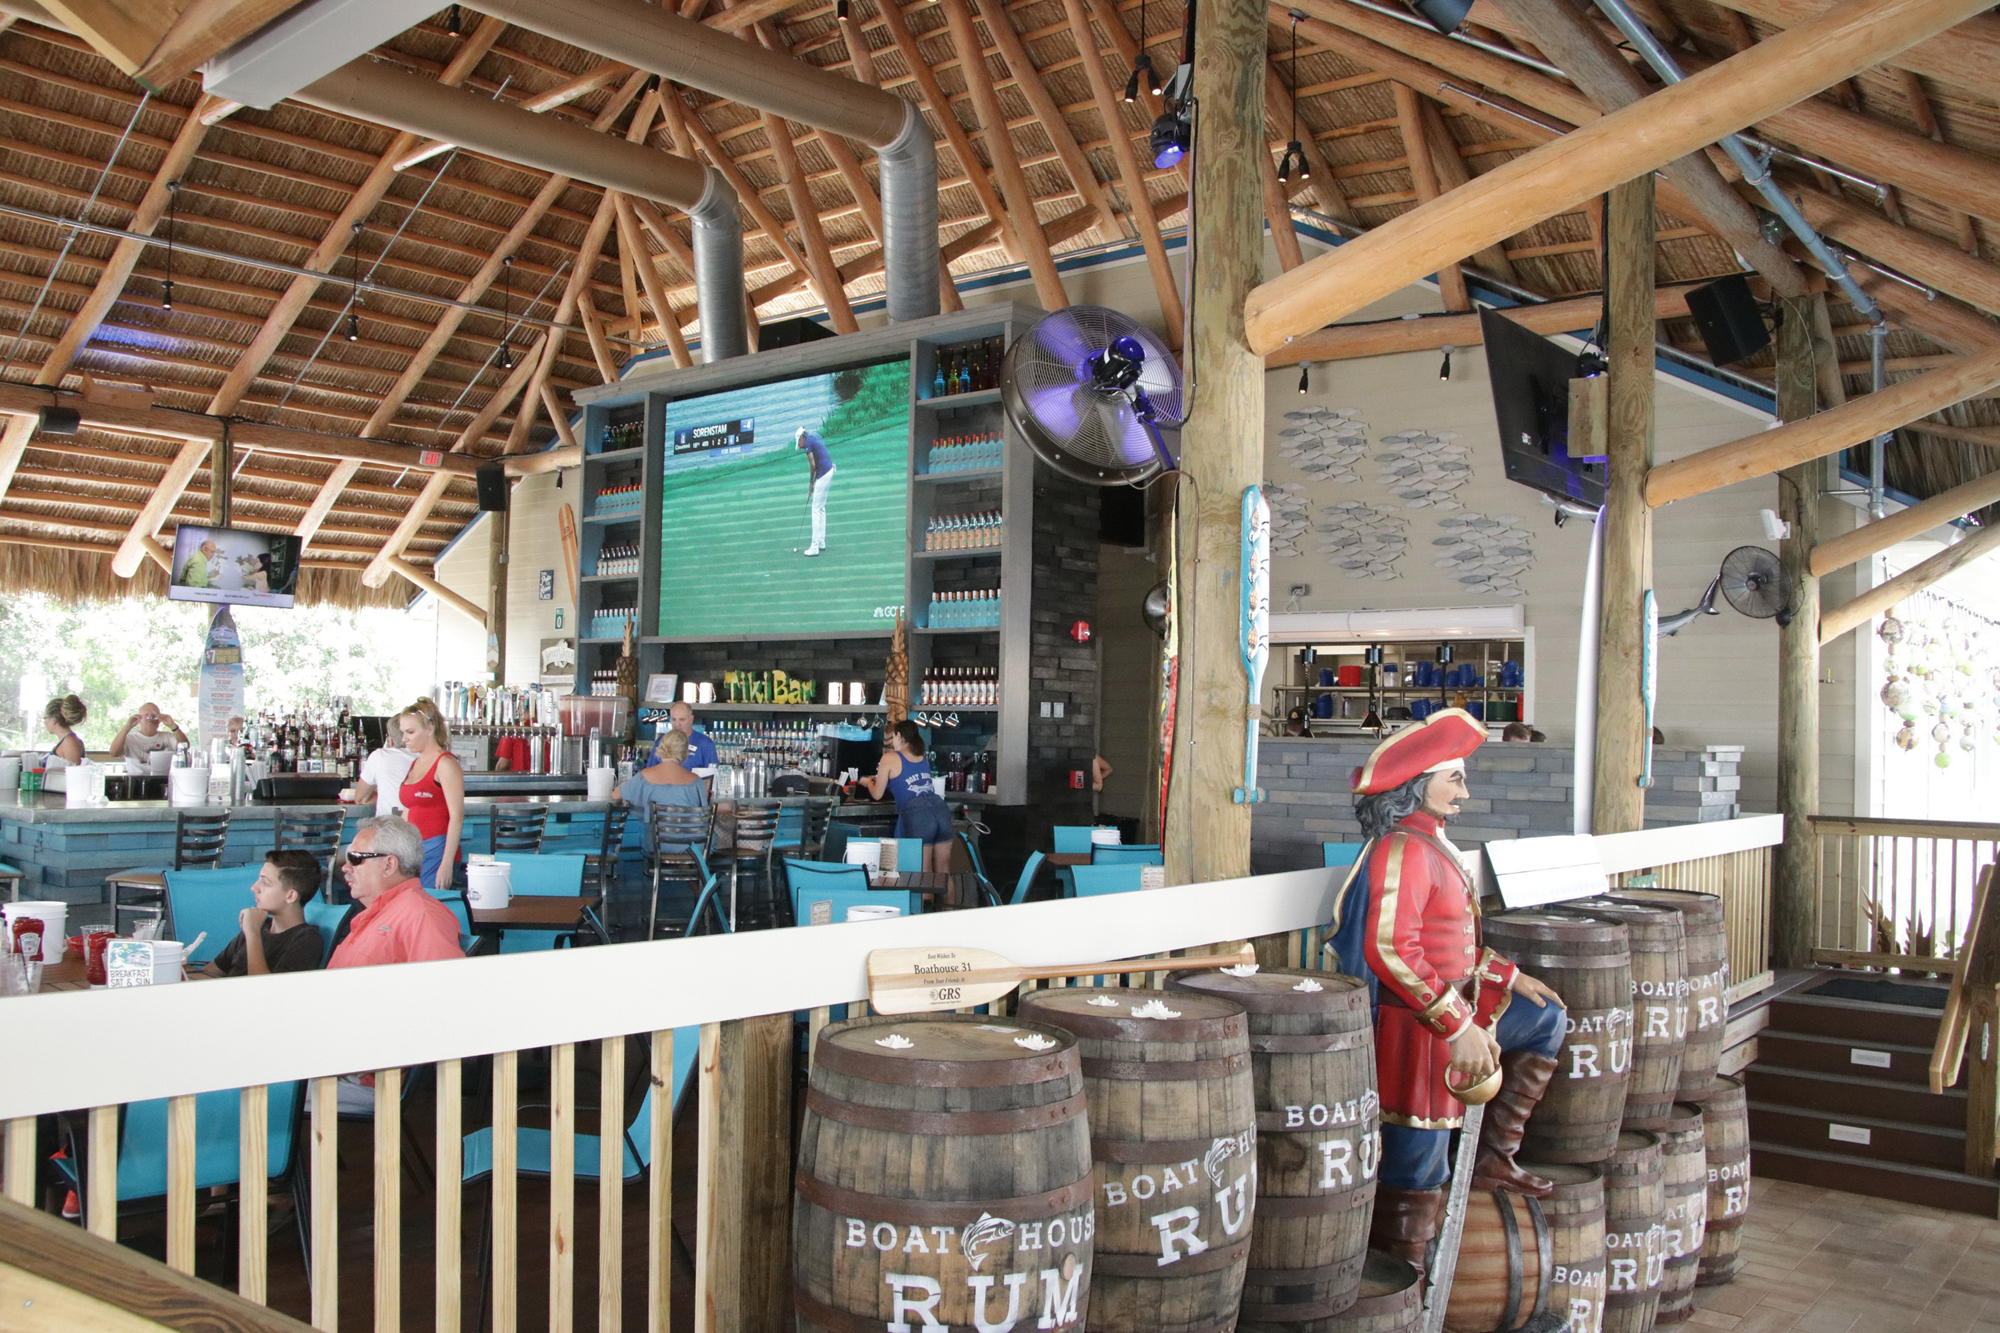 The 12-by-8-foot TV anchors the main dining and bar area.